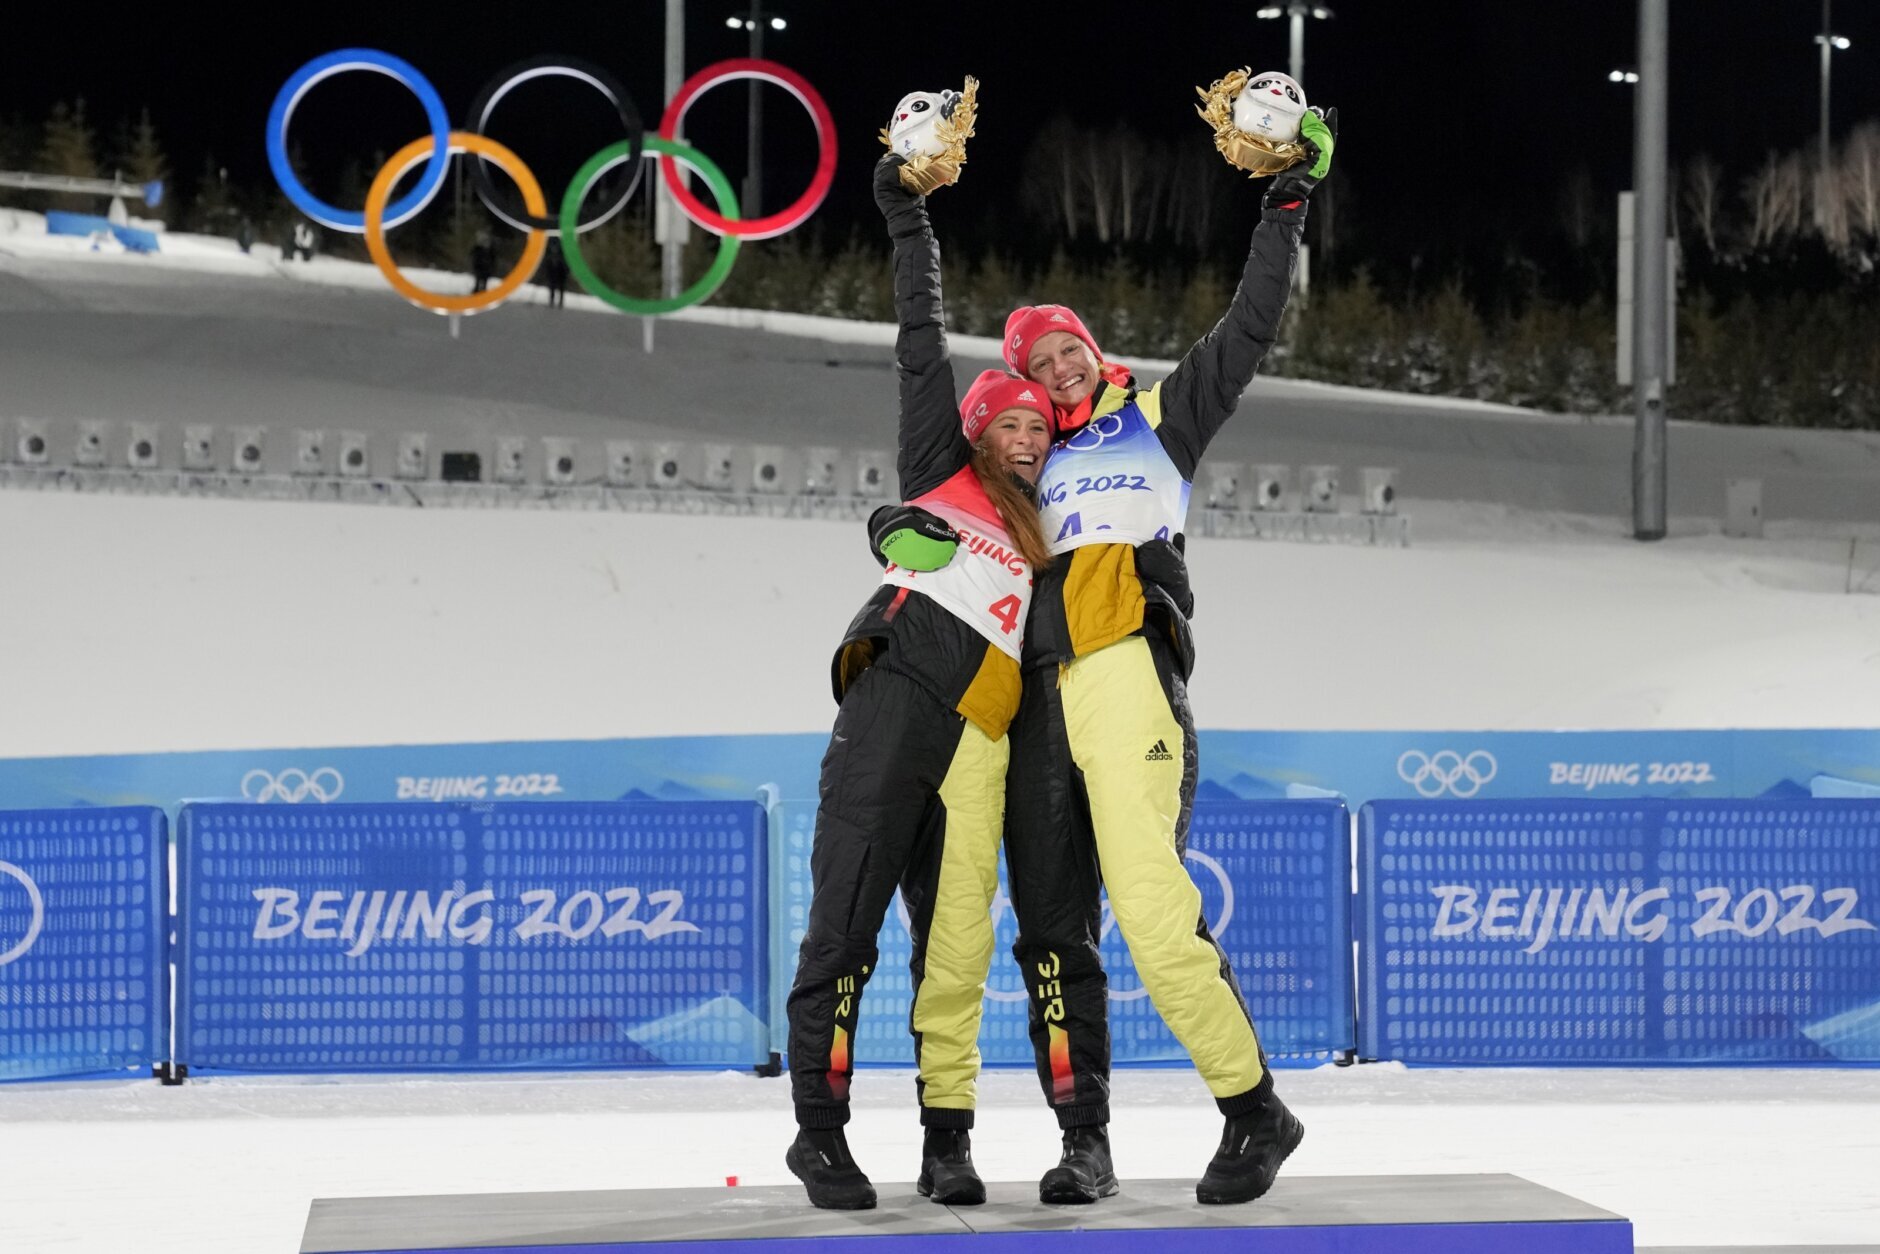 <p>Gold medal finishers Katharina Hennig, of Germany, left, and Victoria Carl, of Germany, celebrate during a venue ceremony after the women&#8217;s team sprint classic cross-country skiing competition at the 2022 Winter Olympics, Wednesday, Feb. 16, 2022, in Zhangjiakou, China.</p>
